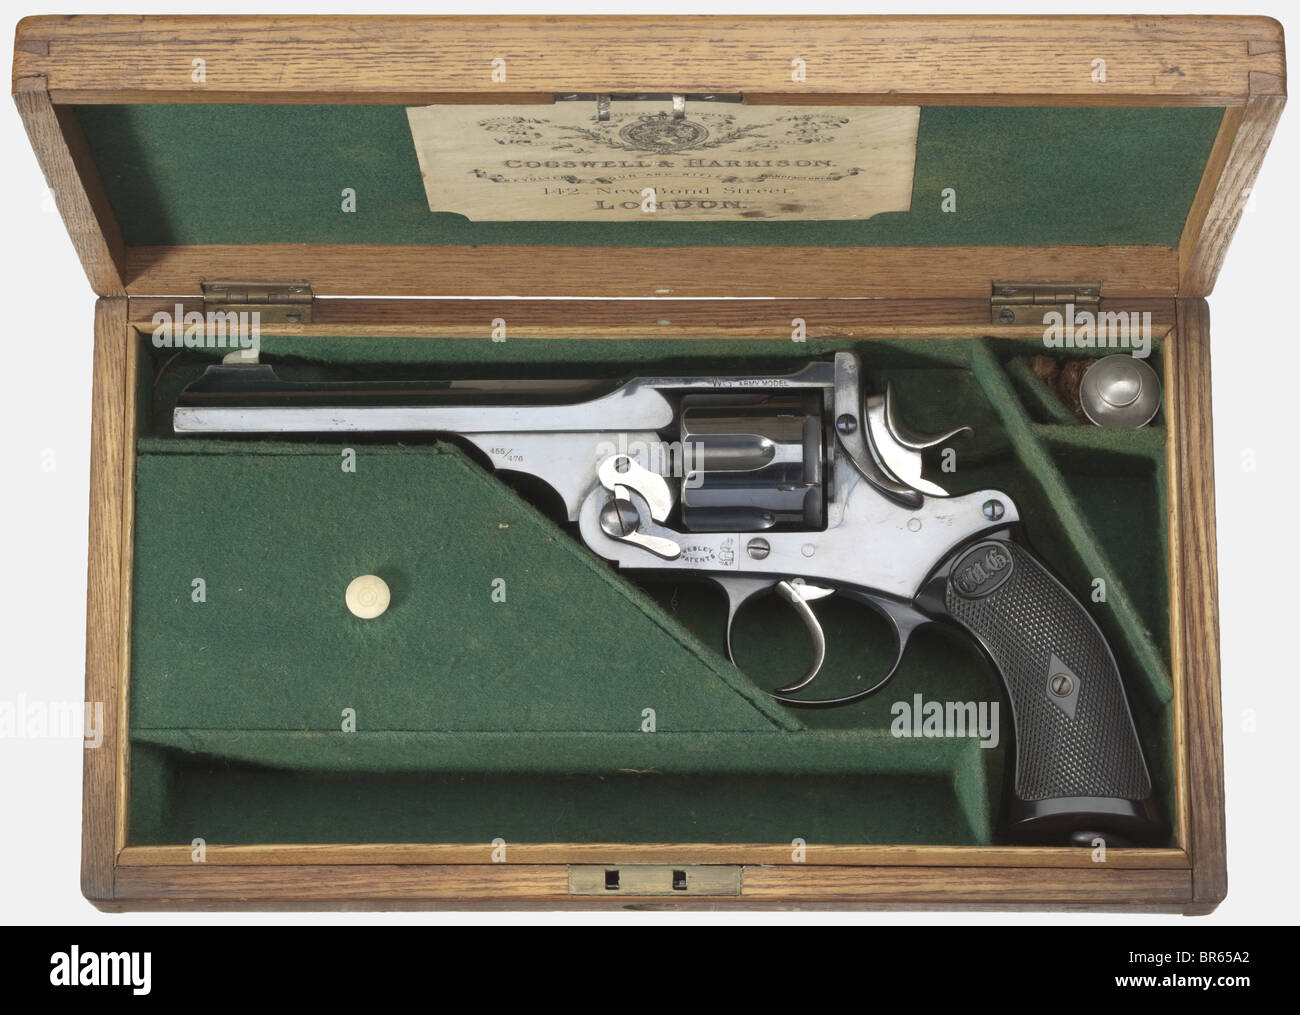 A cased Webley W.G. Army, circa 1899. In cal..455/.476, no. 14860. Matching numbers. Mirror bright bore. Ridged barrel. Barrel length 6 inches. Nickel-silver front sight. 6-shot. Merchant's address "Westley Richards & Co. Ld. London W." on the frame bridge, "WG Army" on the left side of the frame, "455/476" on the barrel housing, and "476" on the cylinder. Complete, original, blue/black, high gloss bluing. Special model with polished hammer, trigger, and cylinder latch, and immaculate black hard rubber grips with the Gothic "WG" logo. Lanyard ring. Absolutely s, Stock Photo